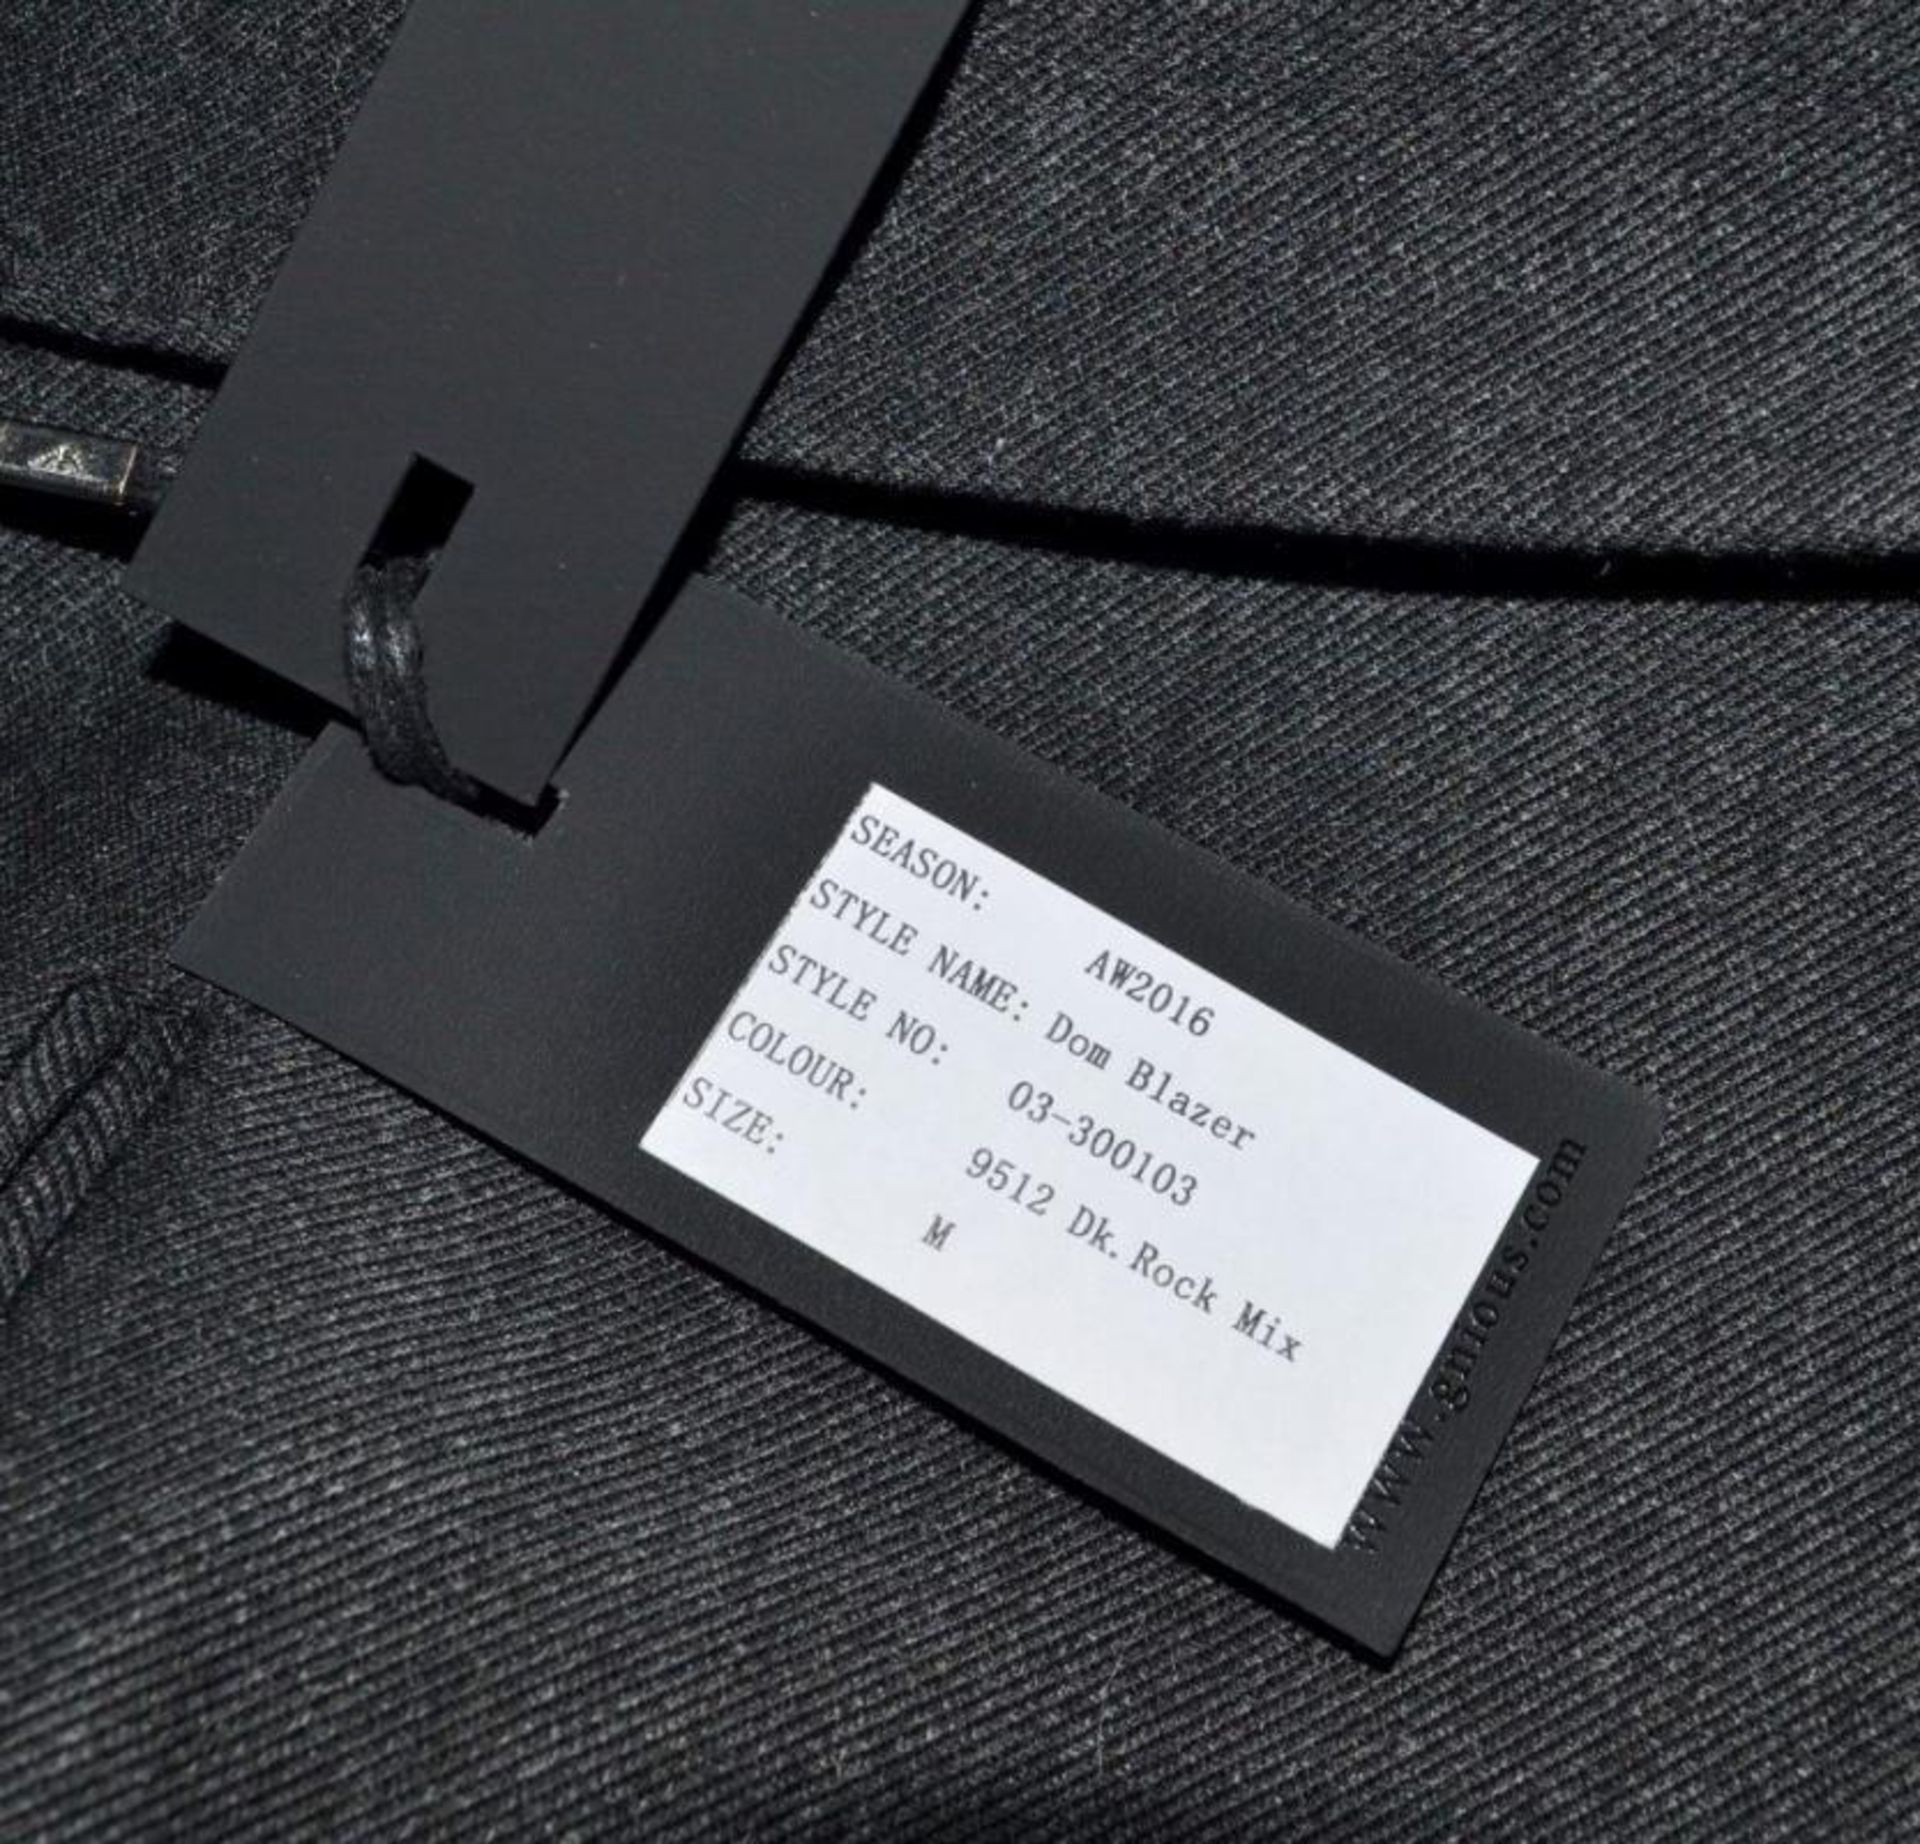 1 x PRE END Branded "Dom" Mens Blazer Jacket - New Stock With Tags - Recent Store Closure - Colour: - Image 2 of 3